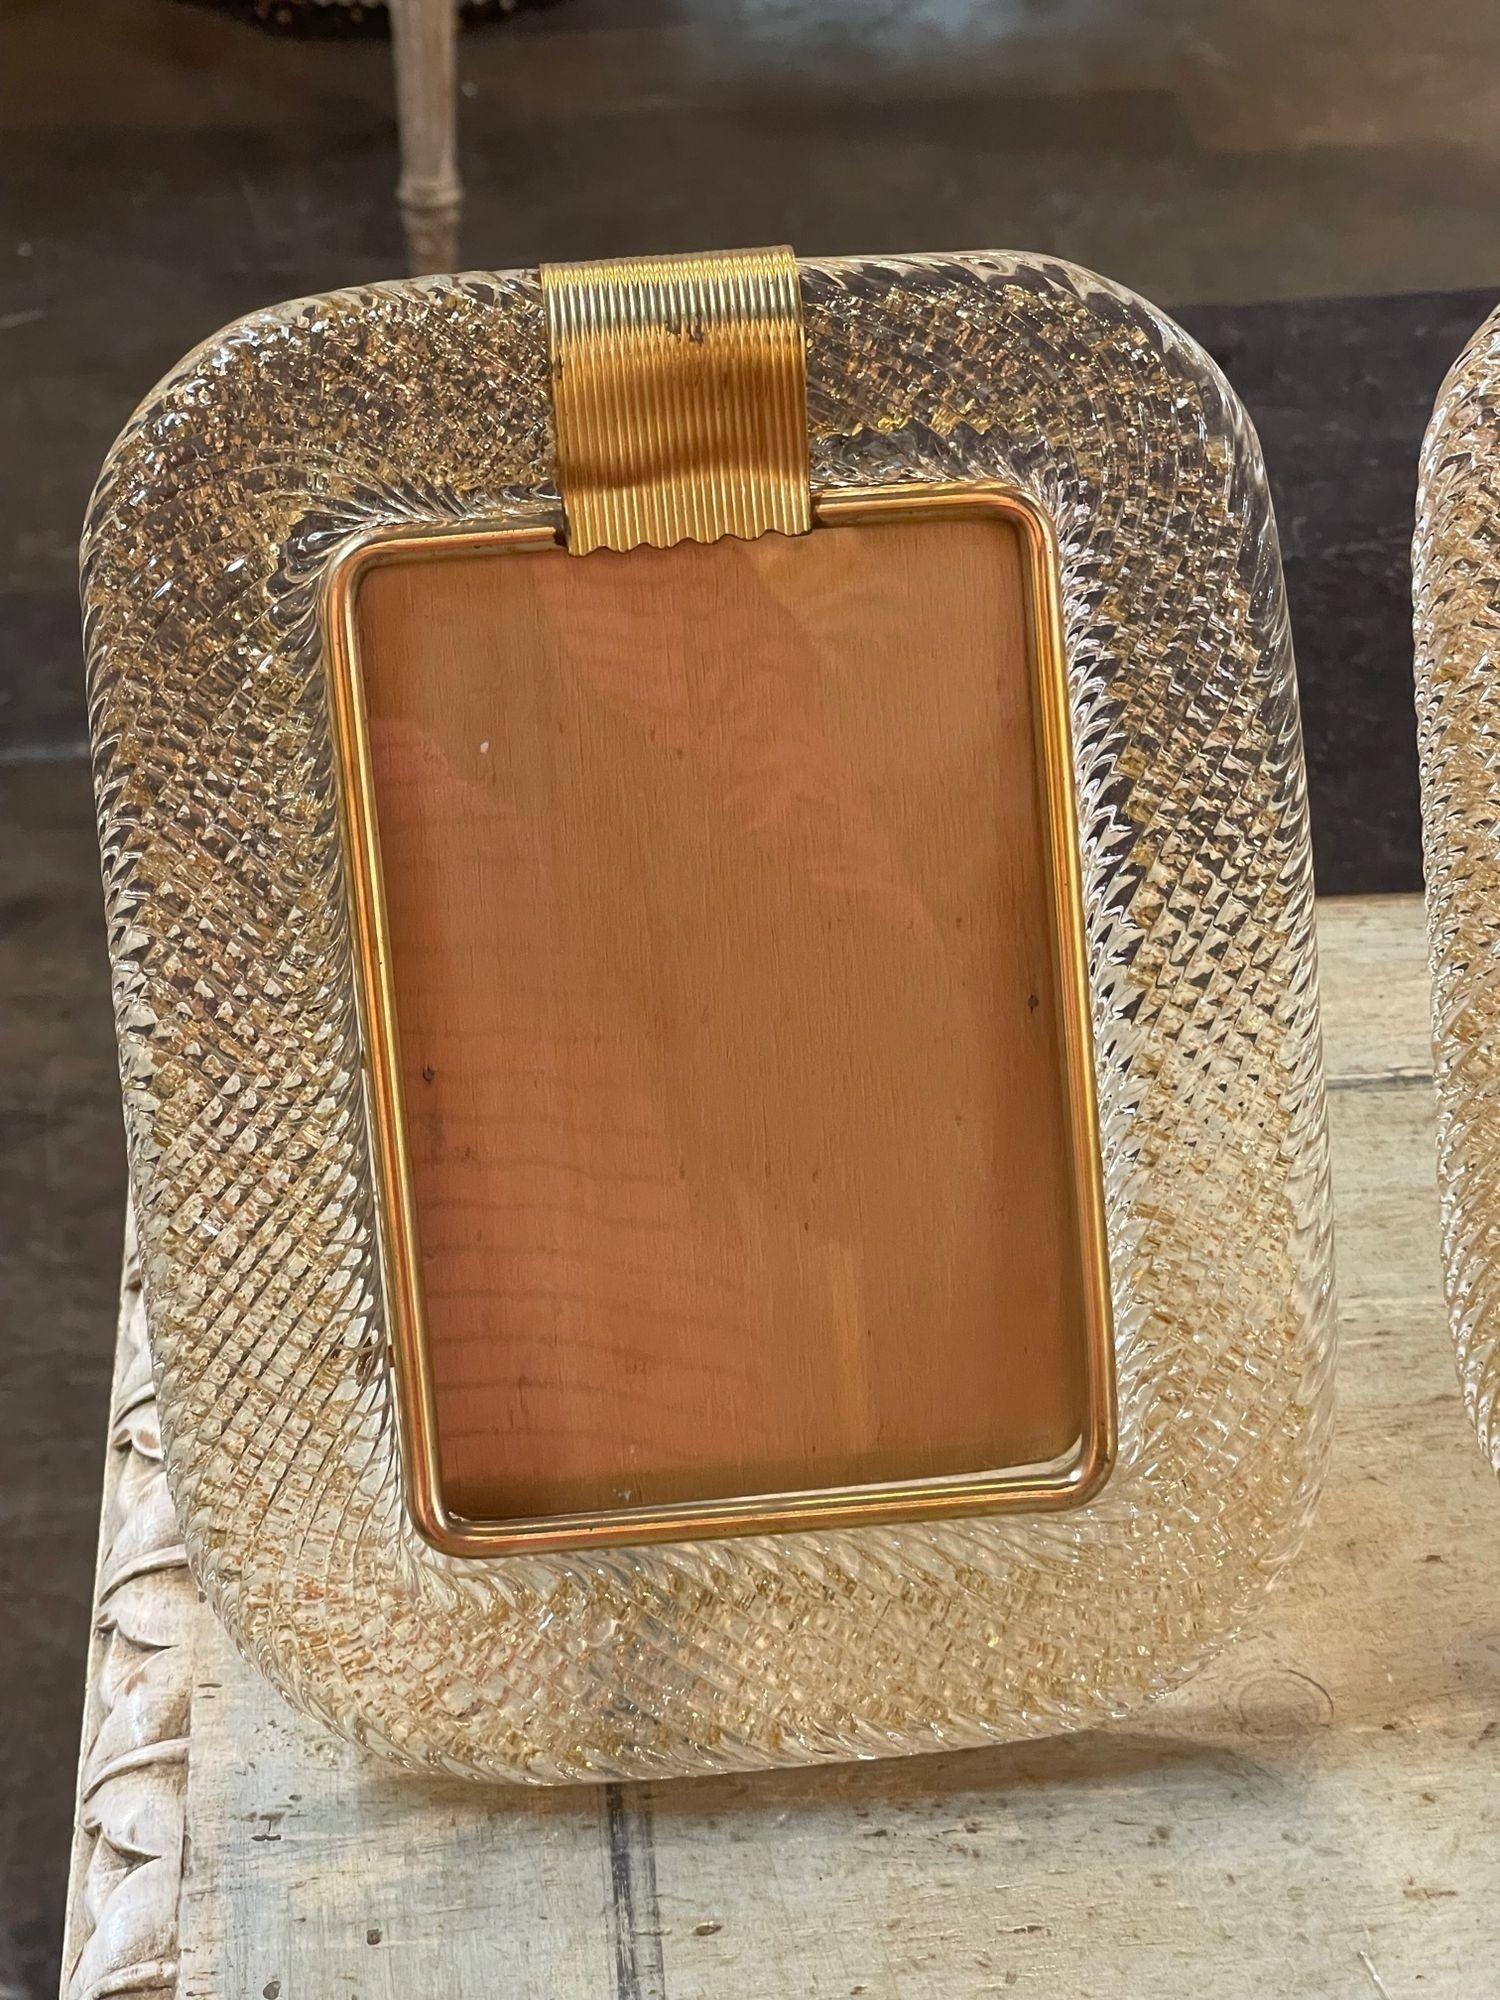 Decorative gold Murano glass picture frame. Featuring beautiful textured glistening glass. Also available in other colors as you can see in the pictures. Makes a fabulous accessory or special gift!.